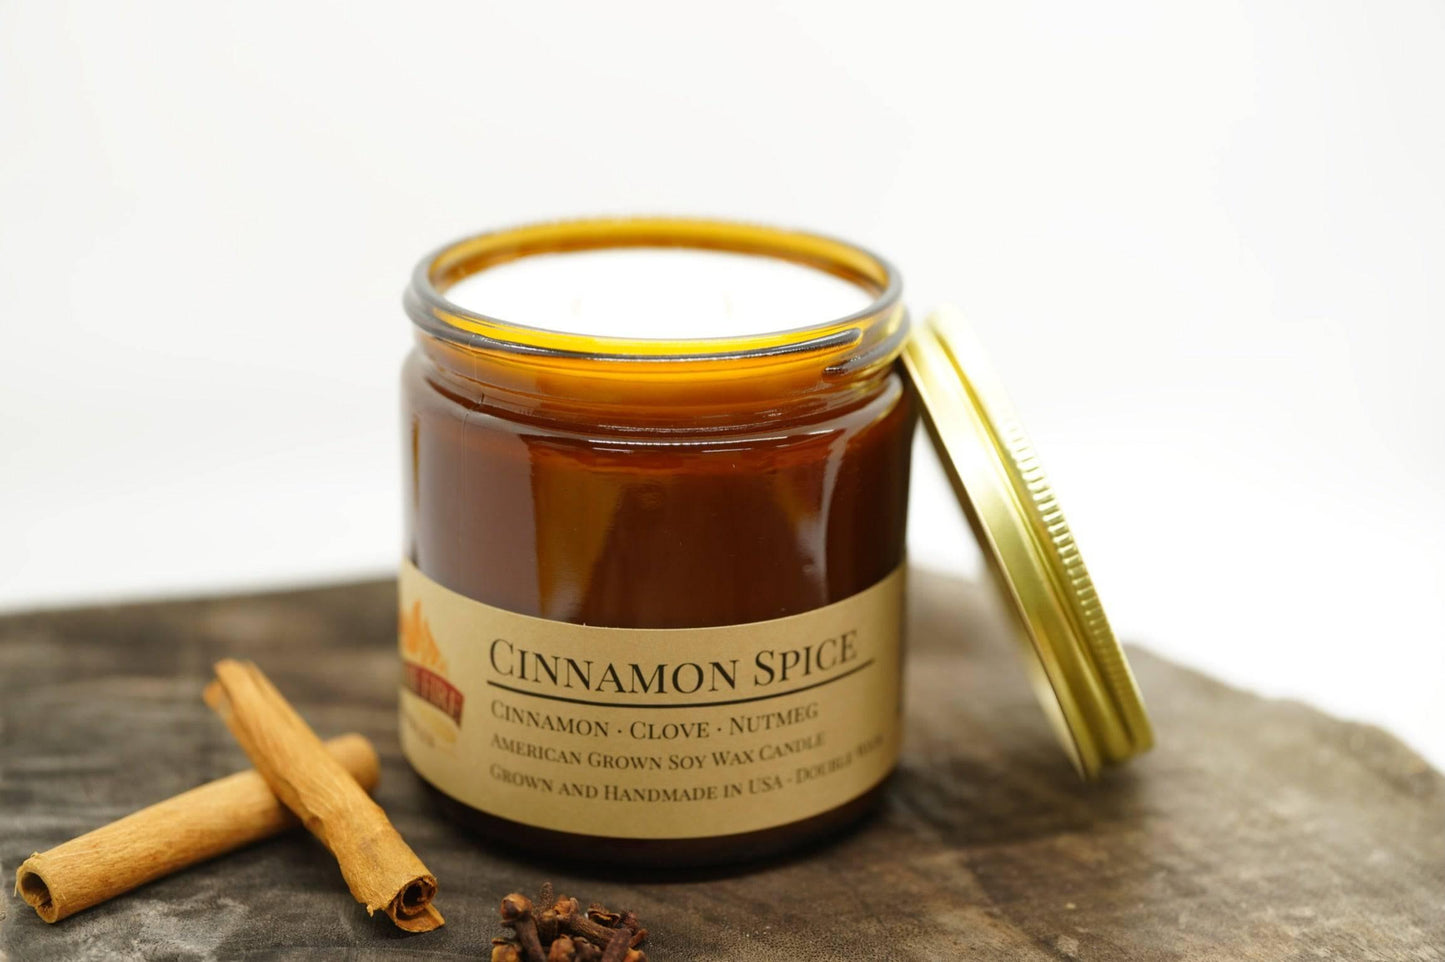 Cinnamon Spice Soy Wax Candle | 16 oz Double Wick Amber Apothecary Jar - Prairie Fire Candles